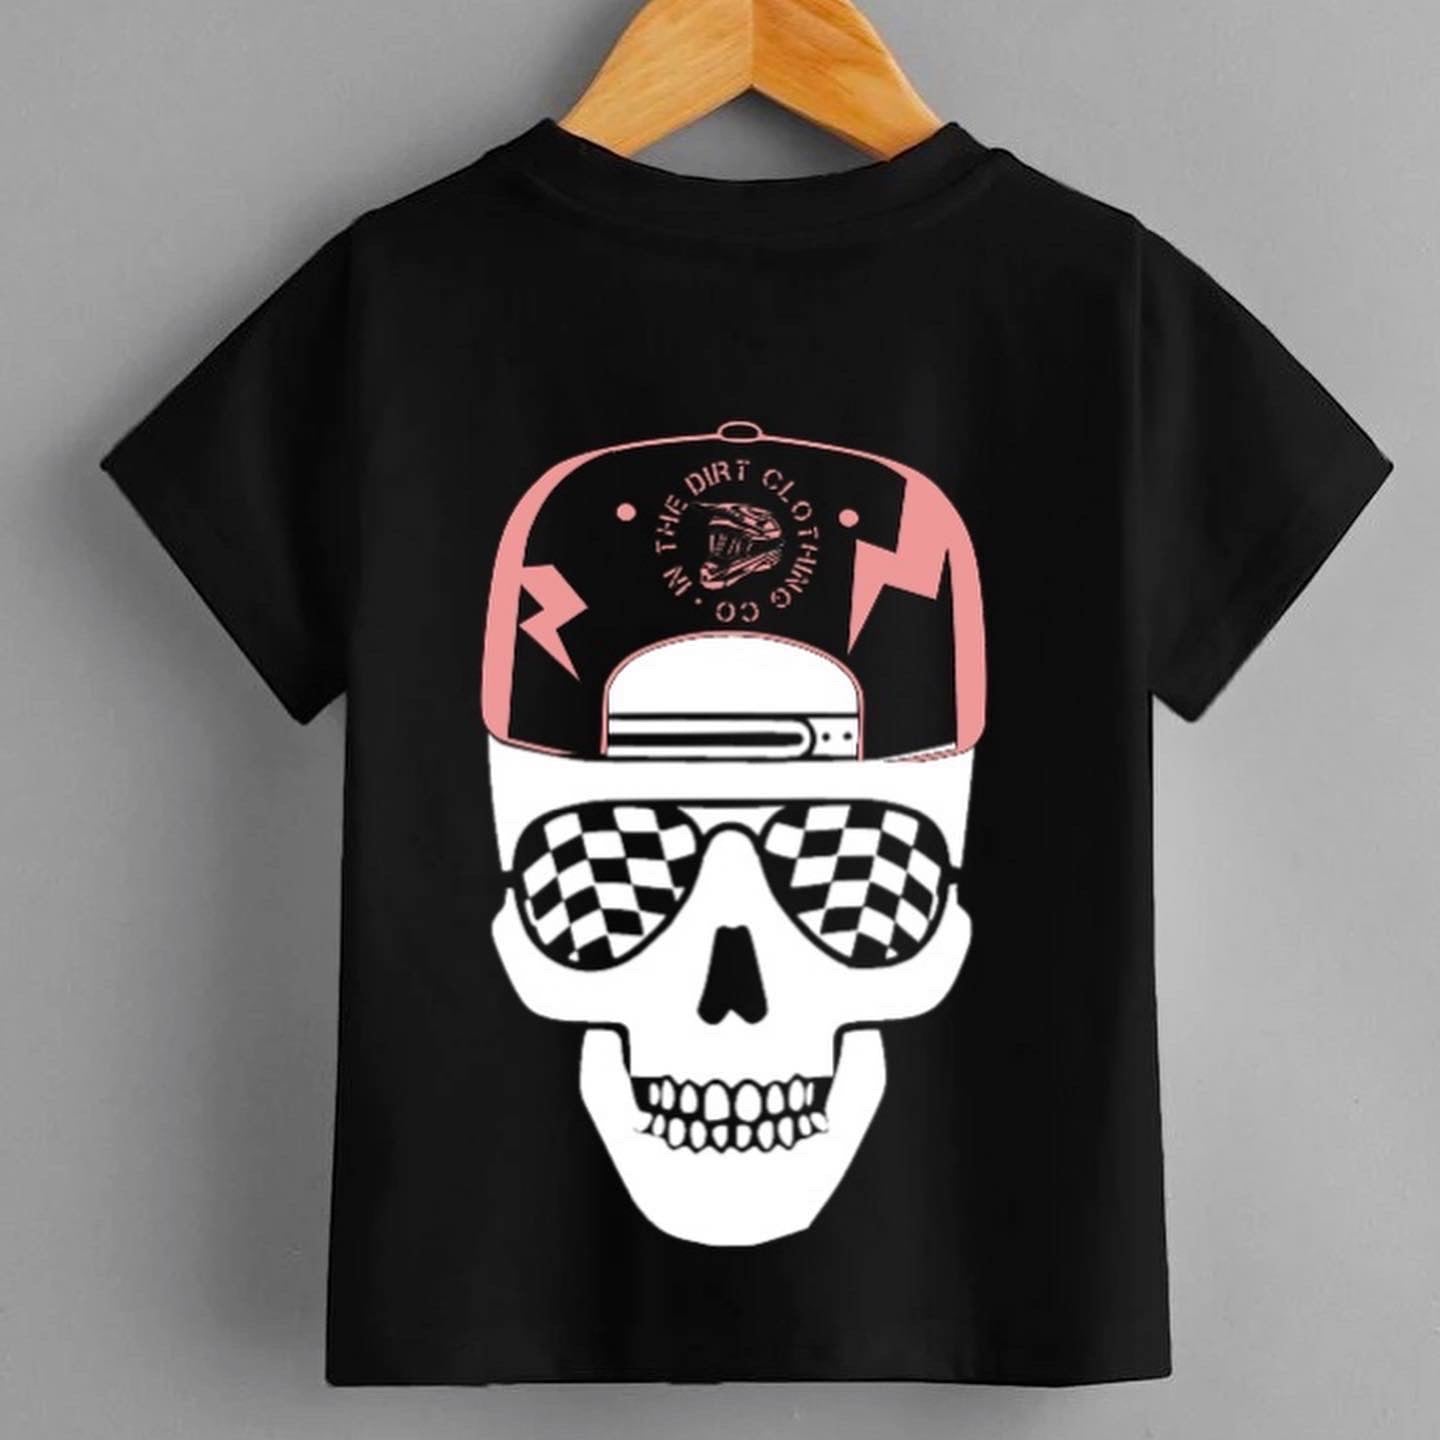 SnapBack Sid Tee. Use the comments box to choose a colour not listed below!